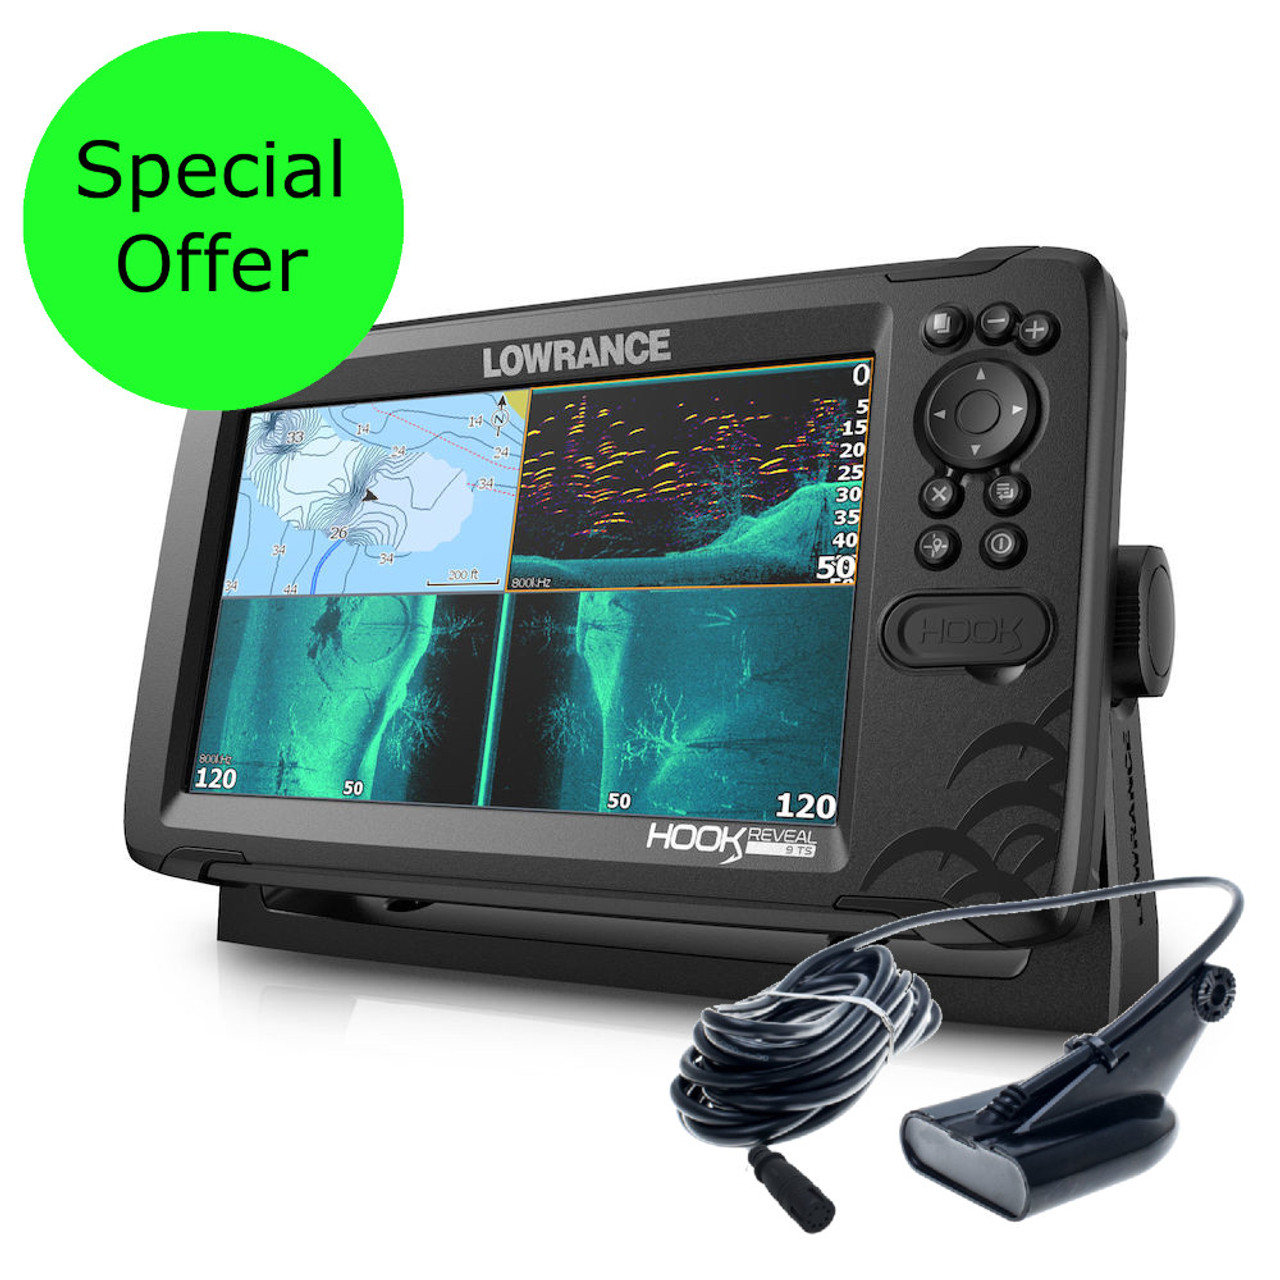 Lowrance Hook Reveal 9 With 50/200 Transducer - Includes